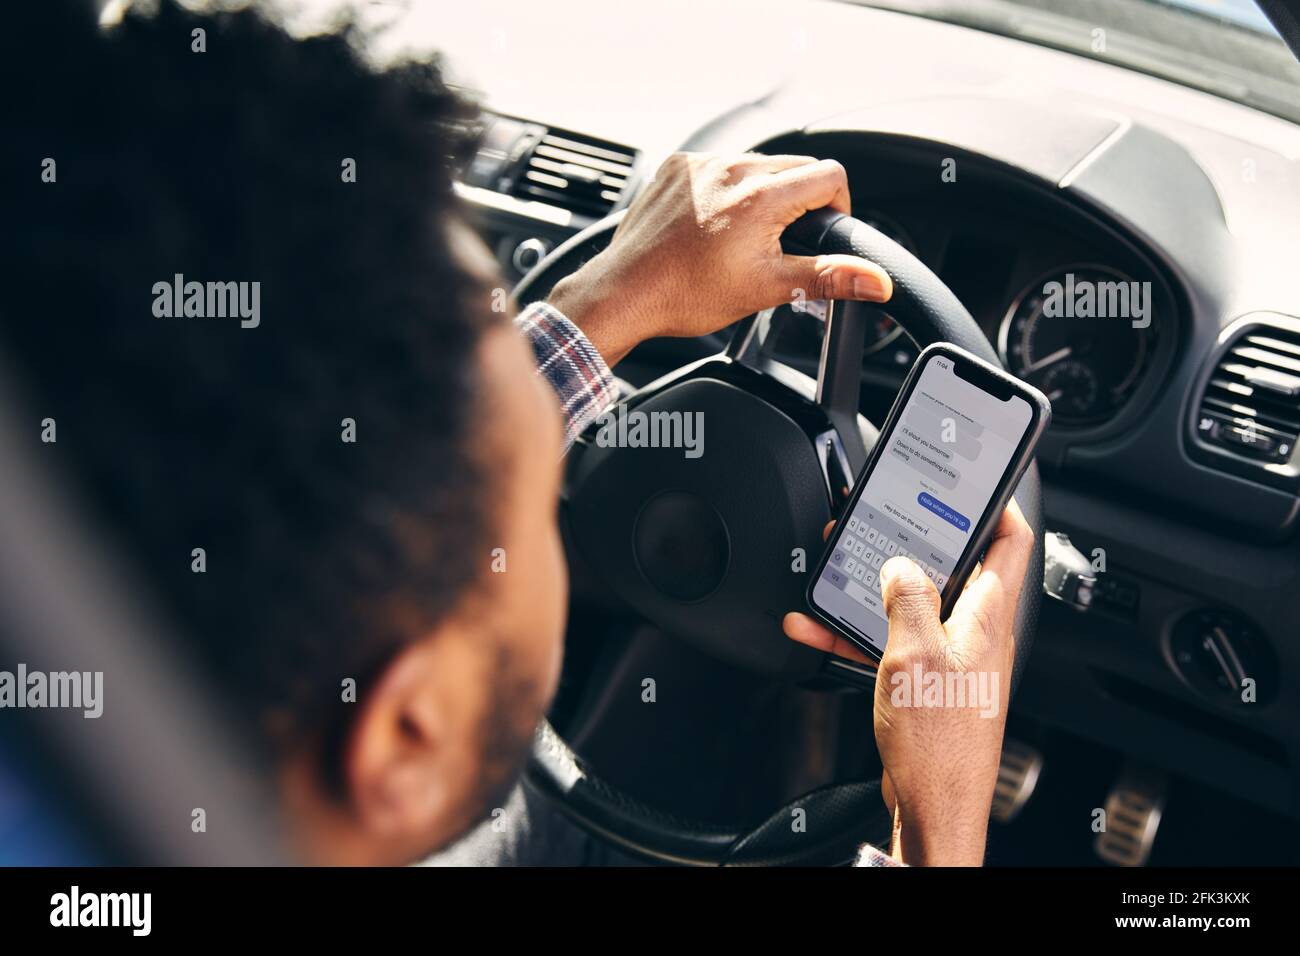 Over the shoulder view of young man driving dangerously texting on mobile phone with one hand on steering wheel Stock Photo